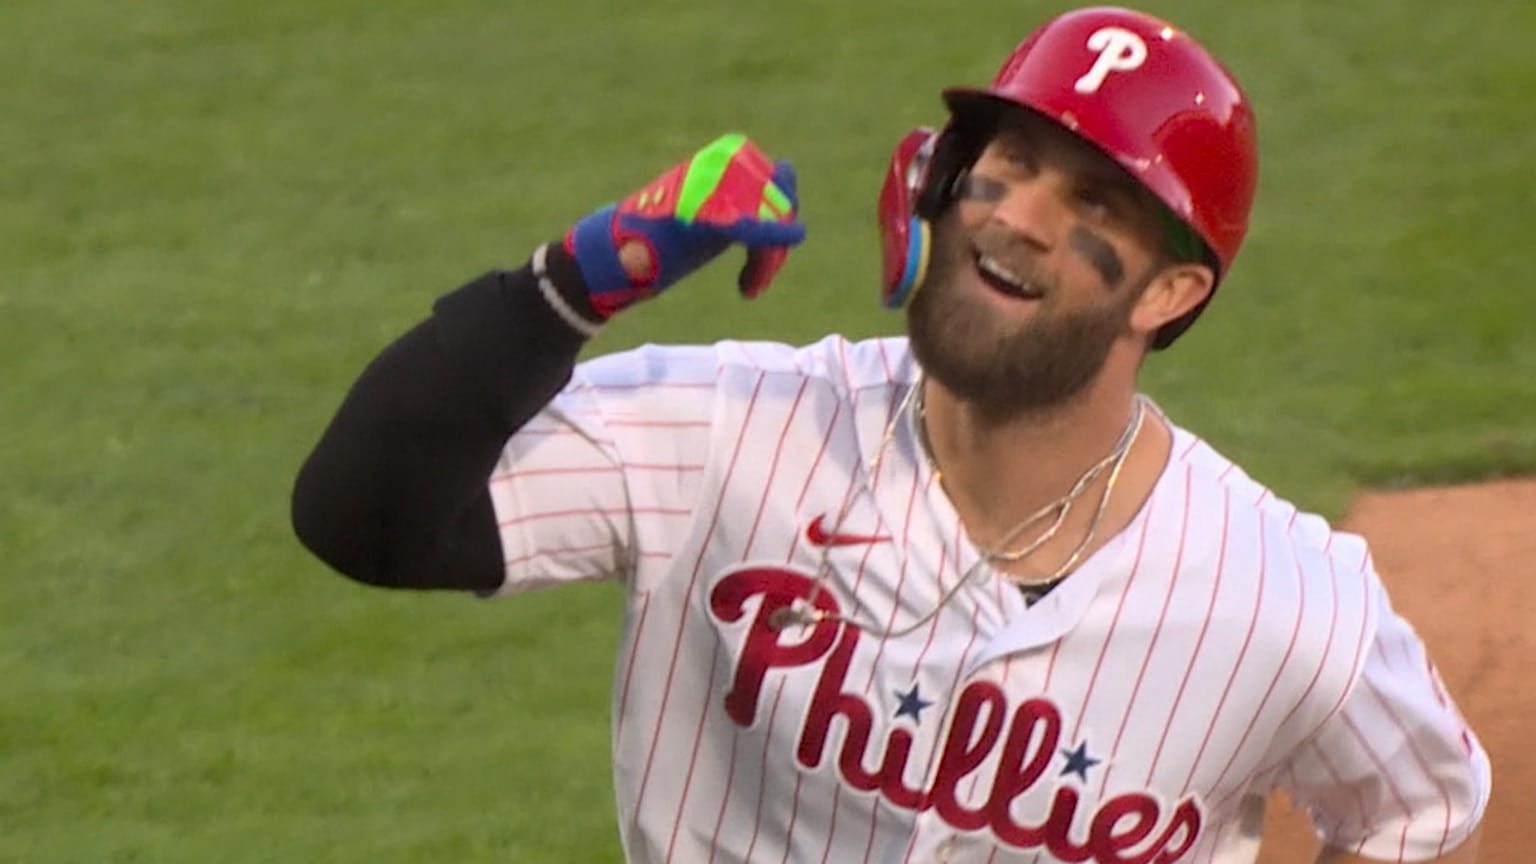 Revenge (x2)! Phillies Bryce Harper tweaks Braves with 'Coach Prime' shirt,  then hits 2 HRs